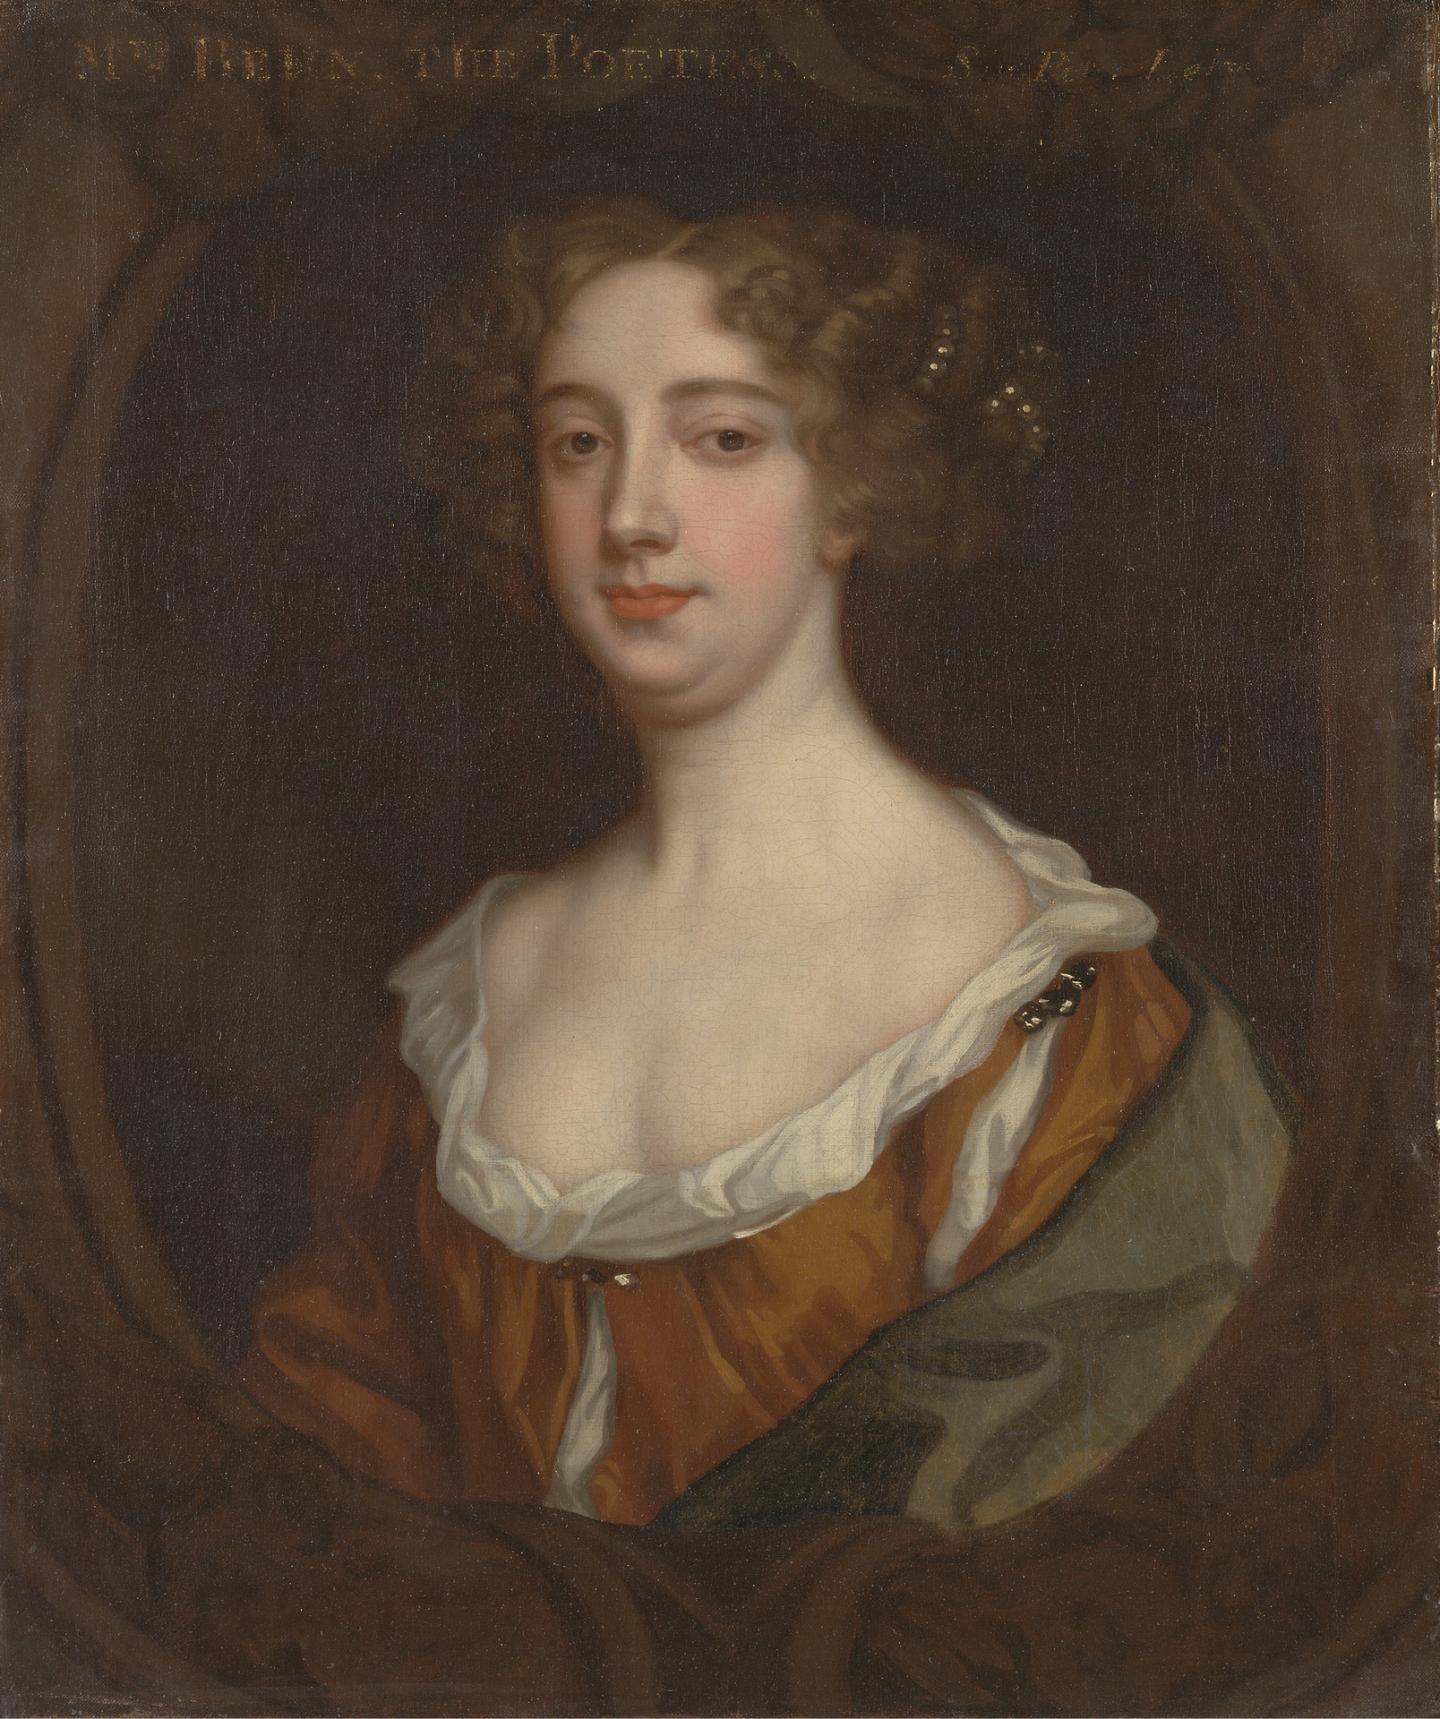 Aphra Behn by Sir Peter Lely, c.1670 (source: Wikimedia, Yale Center for British Art, New Haven, Connecticut)